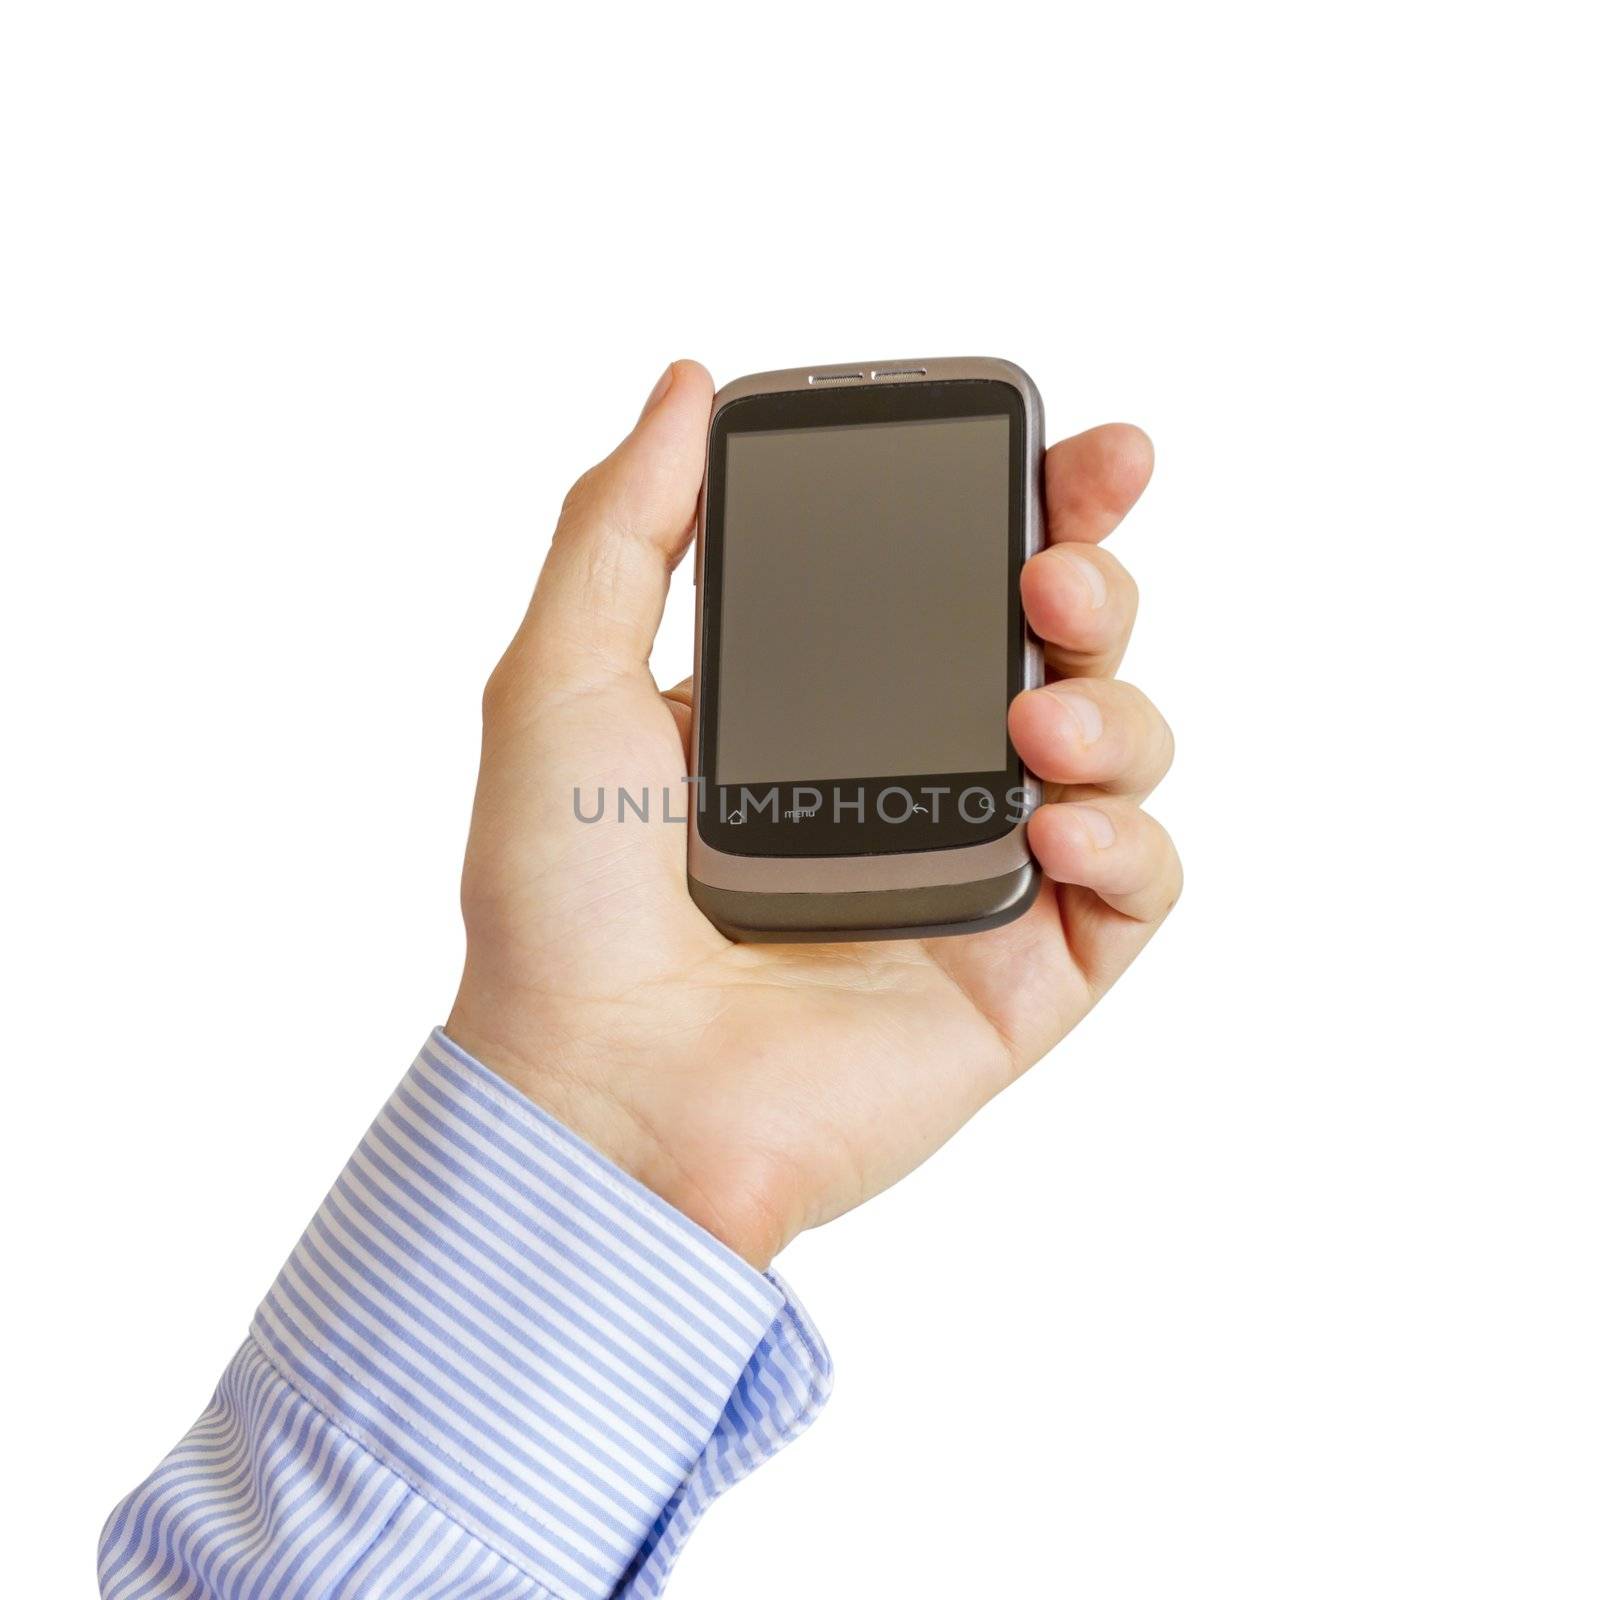 Holding Mobile Smart Phone In Hand by manaemedia